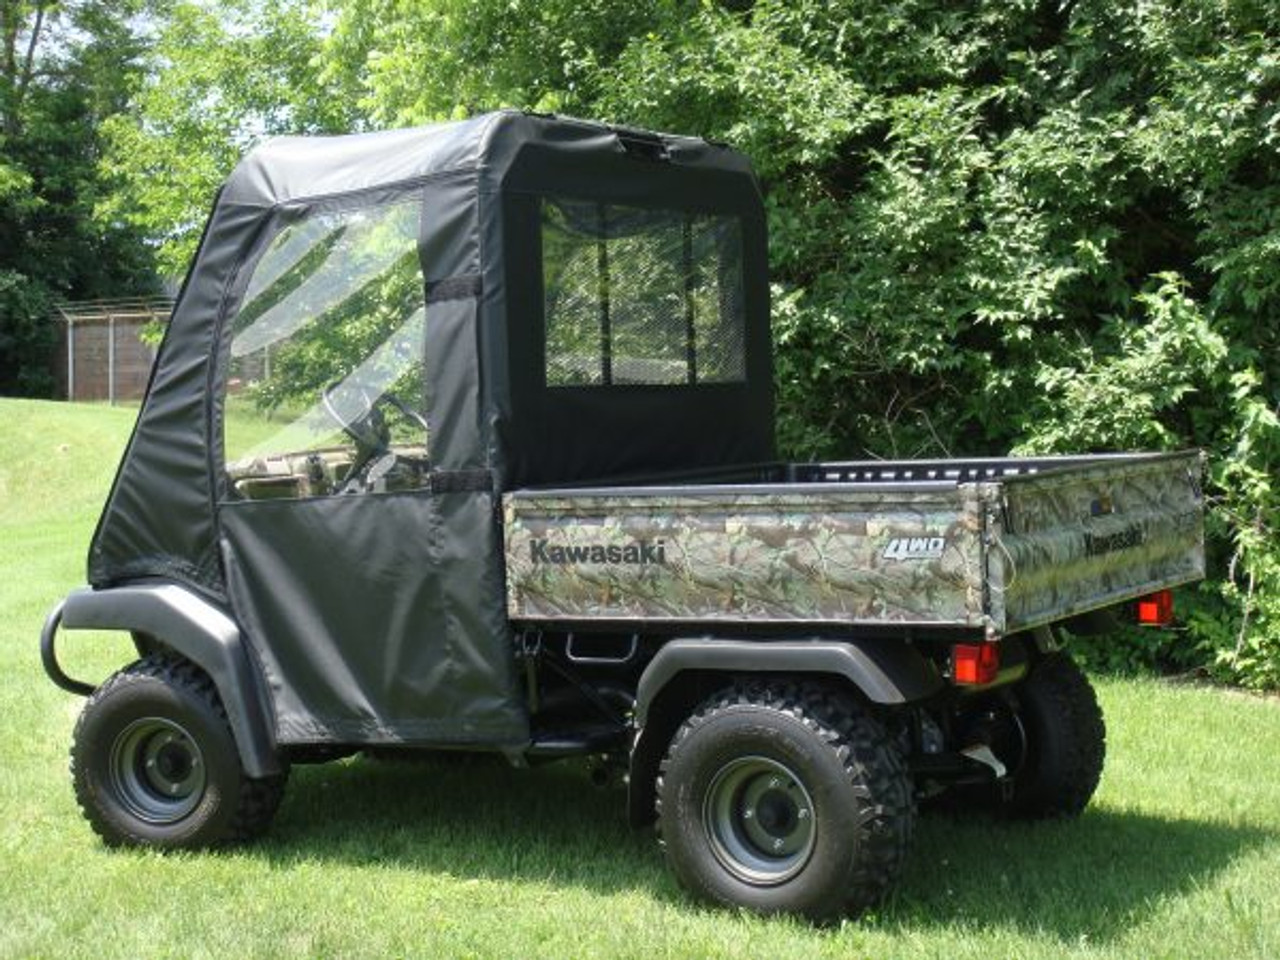 3 Star side x side Kawasaki Mule 3000/3010 doors and rear window side and rear angle view